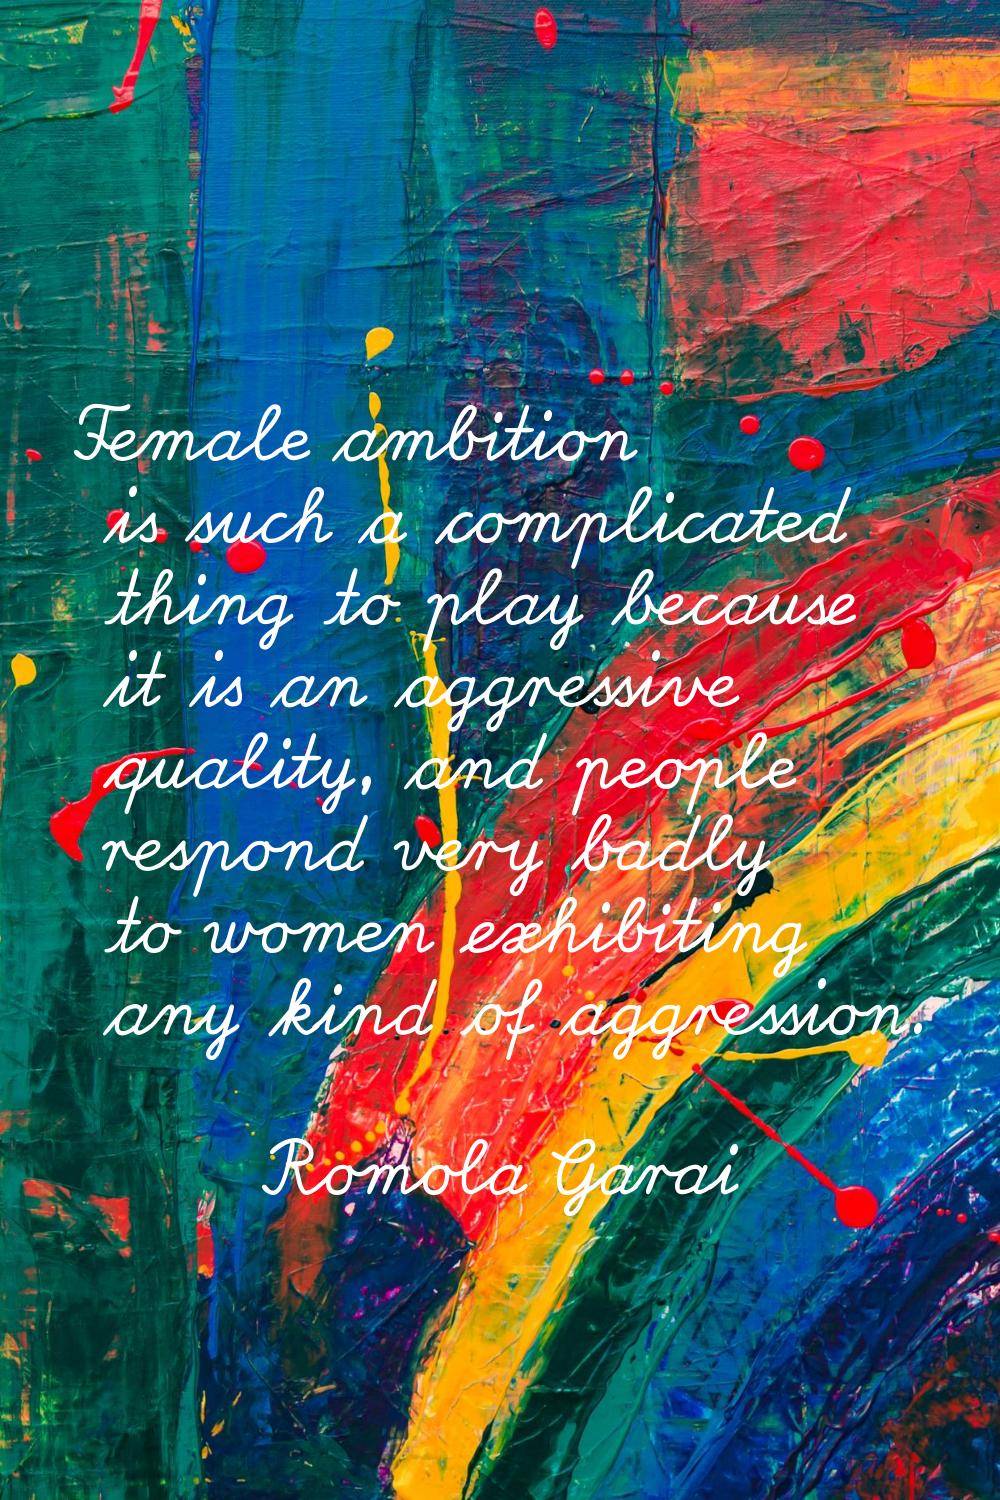 Female ambition is such a complicated thing to play because it is an aggressive quality, and people